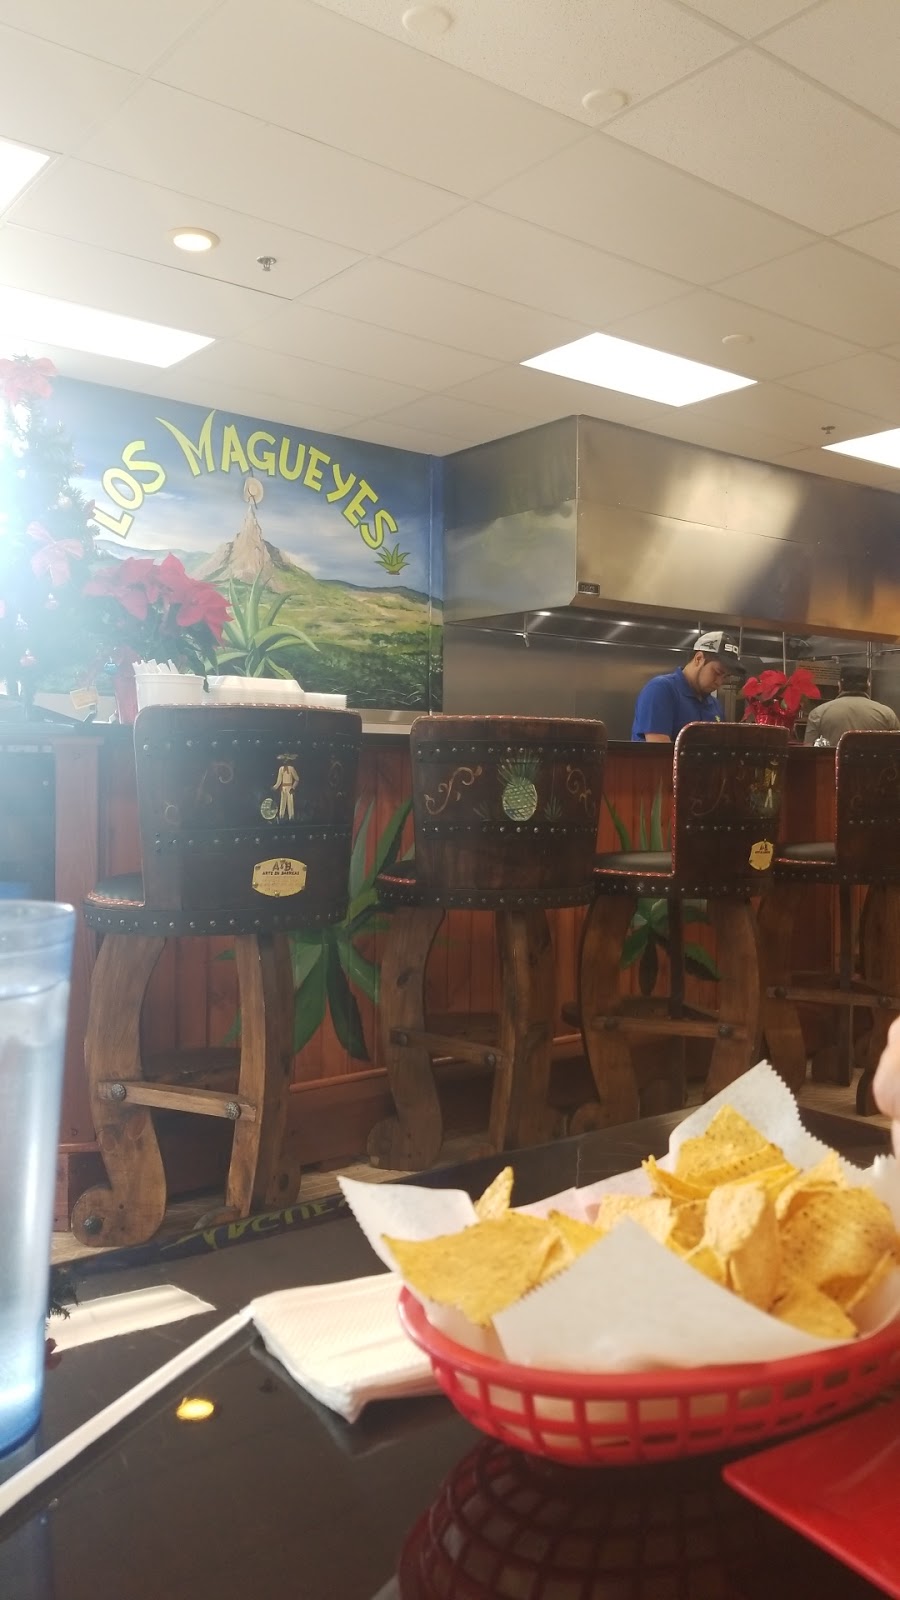 Mexican Grill Los Magueyes | 7221 State Park Rd, Fox Lake, IL 60020 | Phone: (815) 581-0169